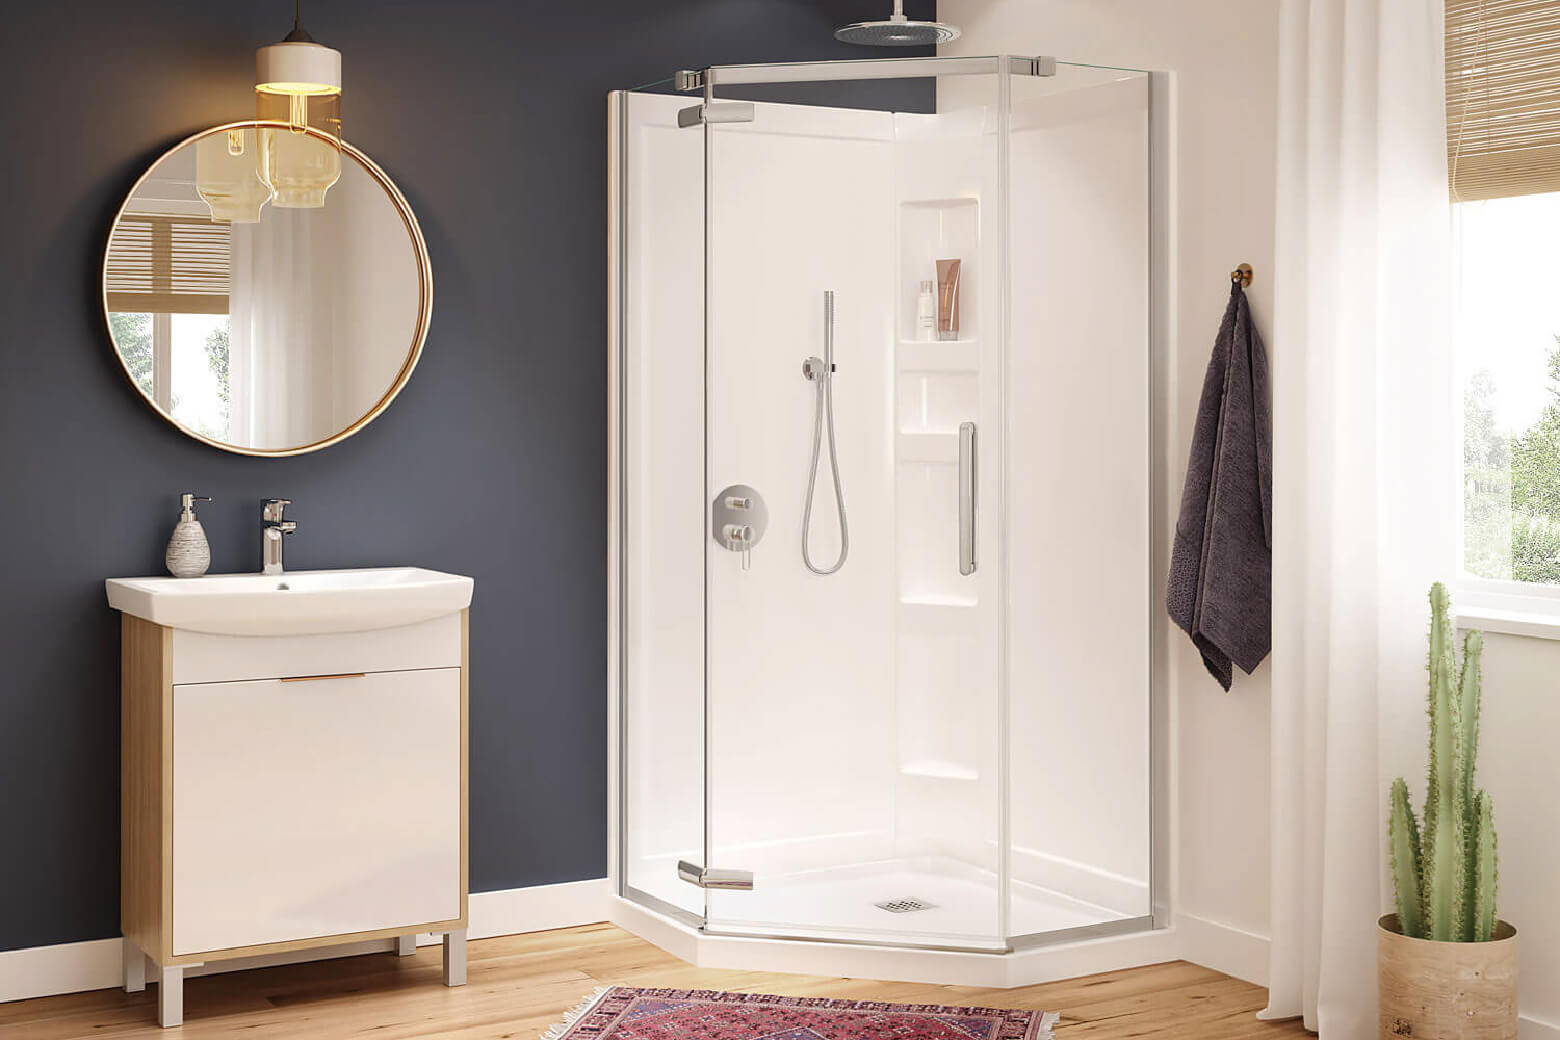 13 Walk-In Shower Ideas for Small Bathrooms